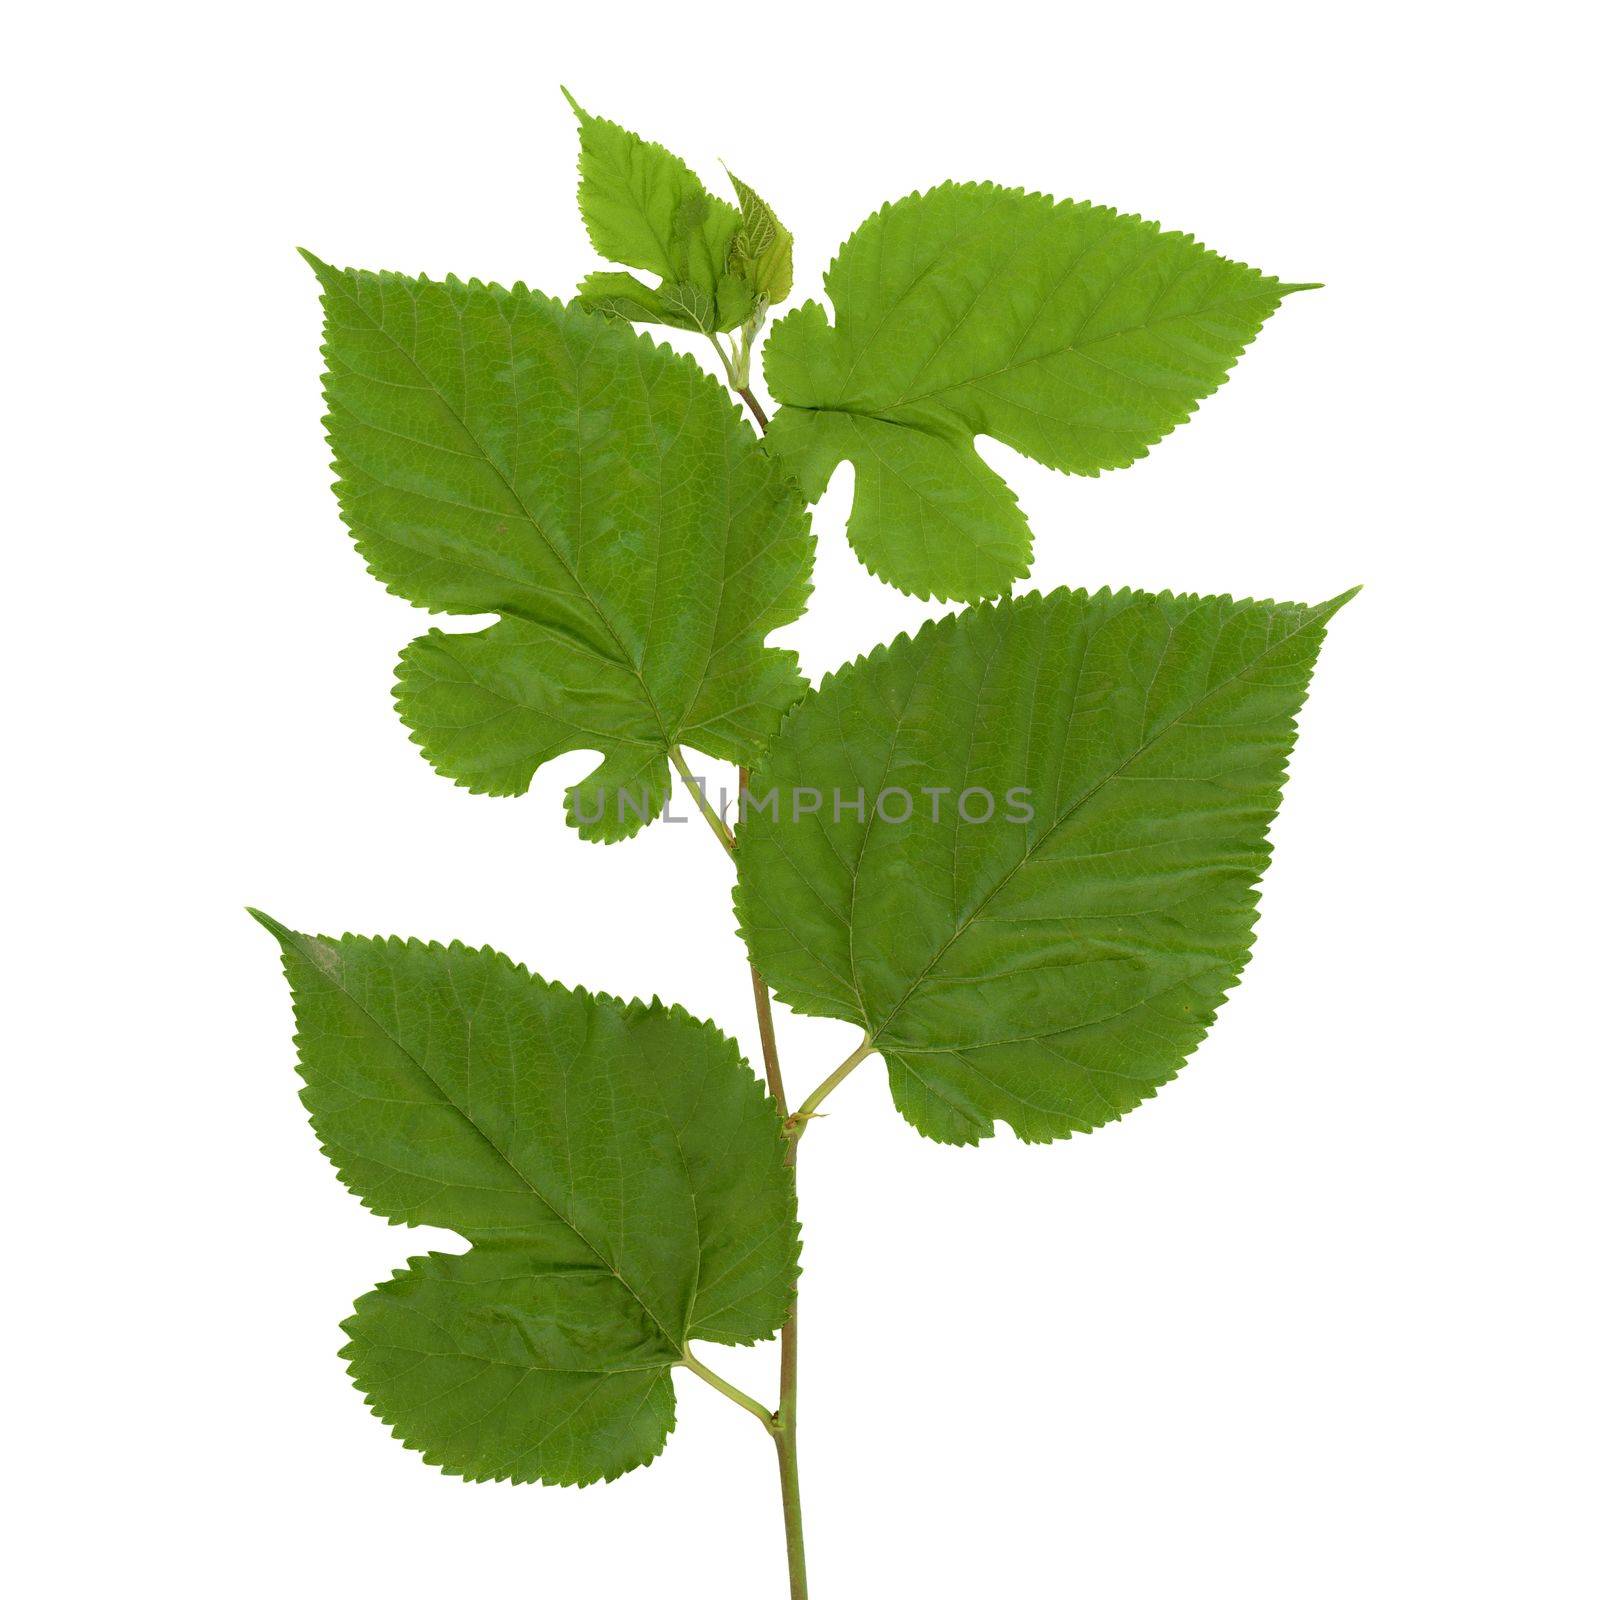 white mulberry tree (Morus alba) leaf isolated over white by claudiodivizia